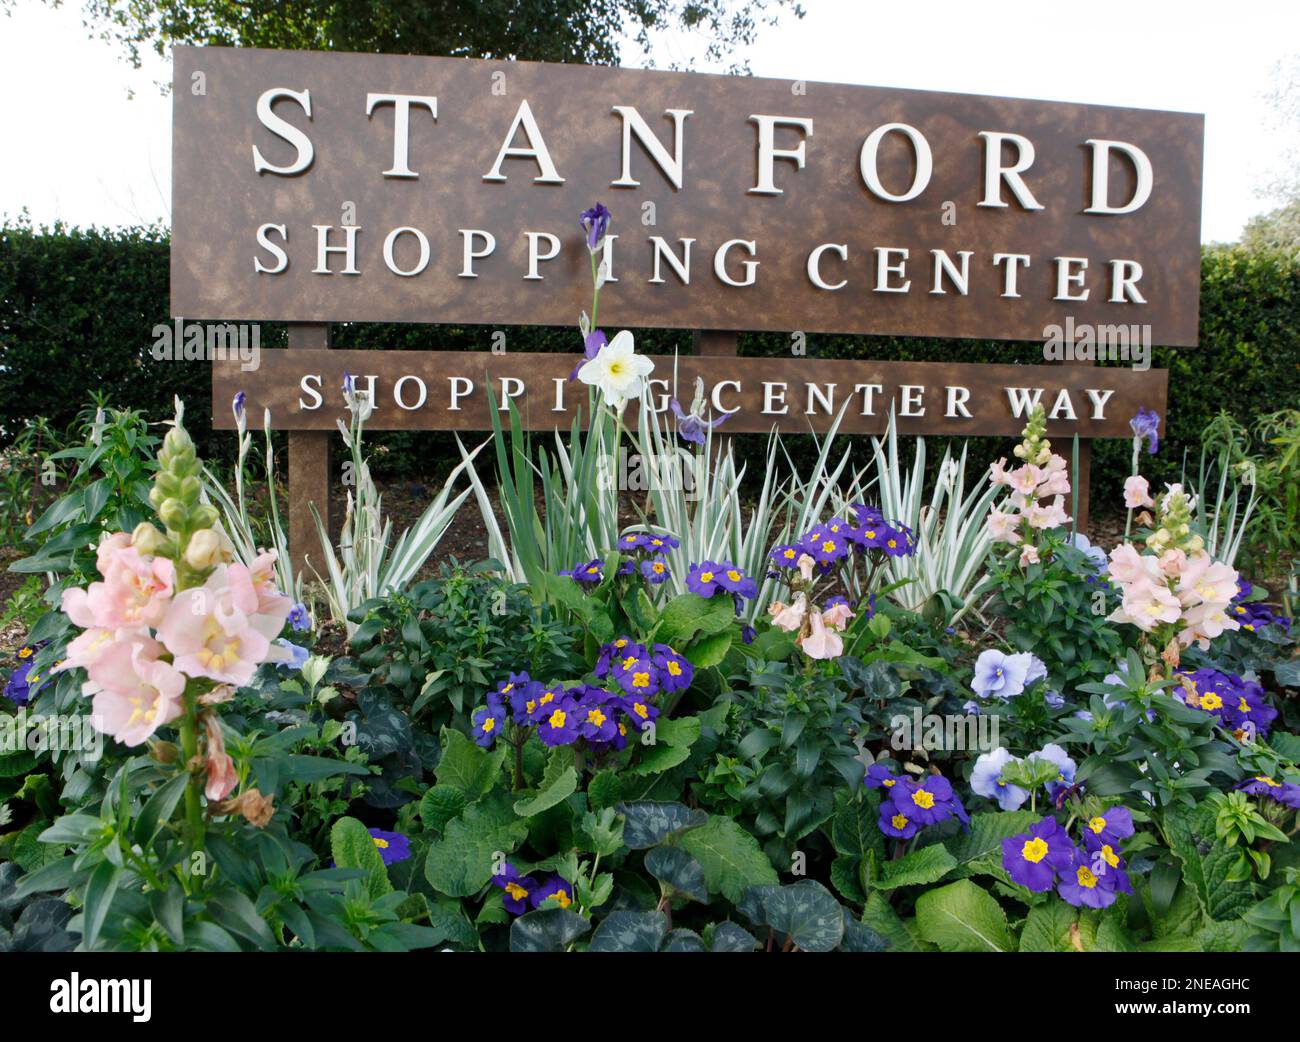 Stanford Shopping Center - our home since 1956!